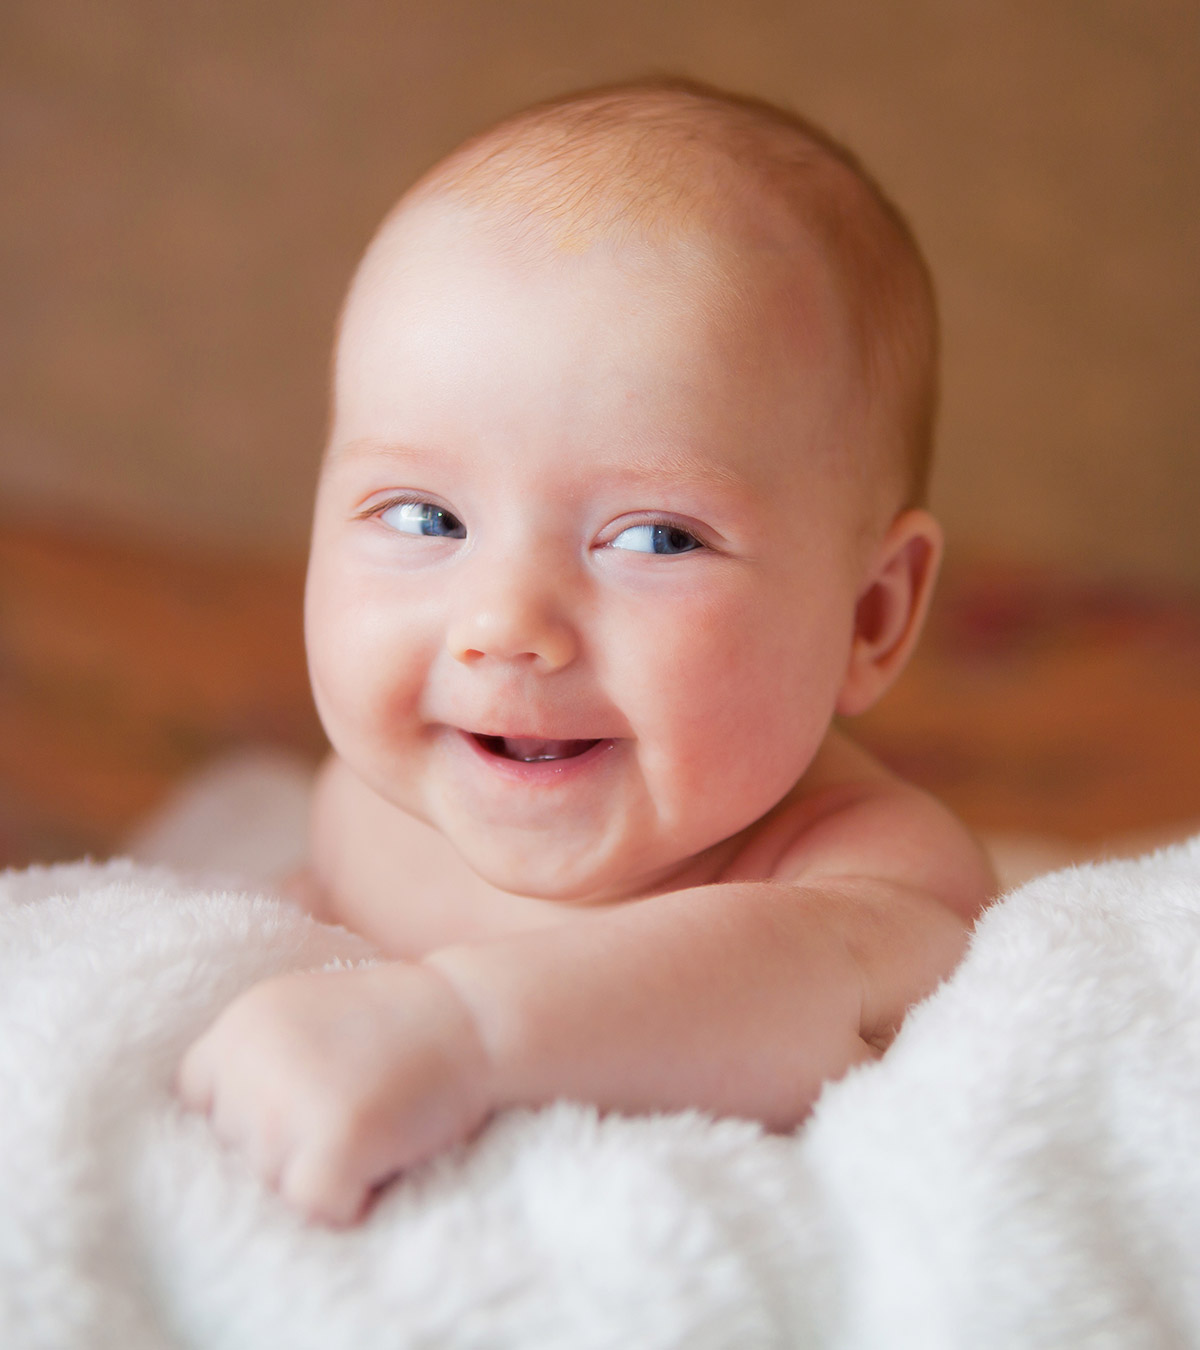 26 Truly Amazing Facts About Babies